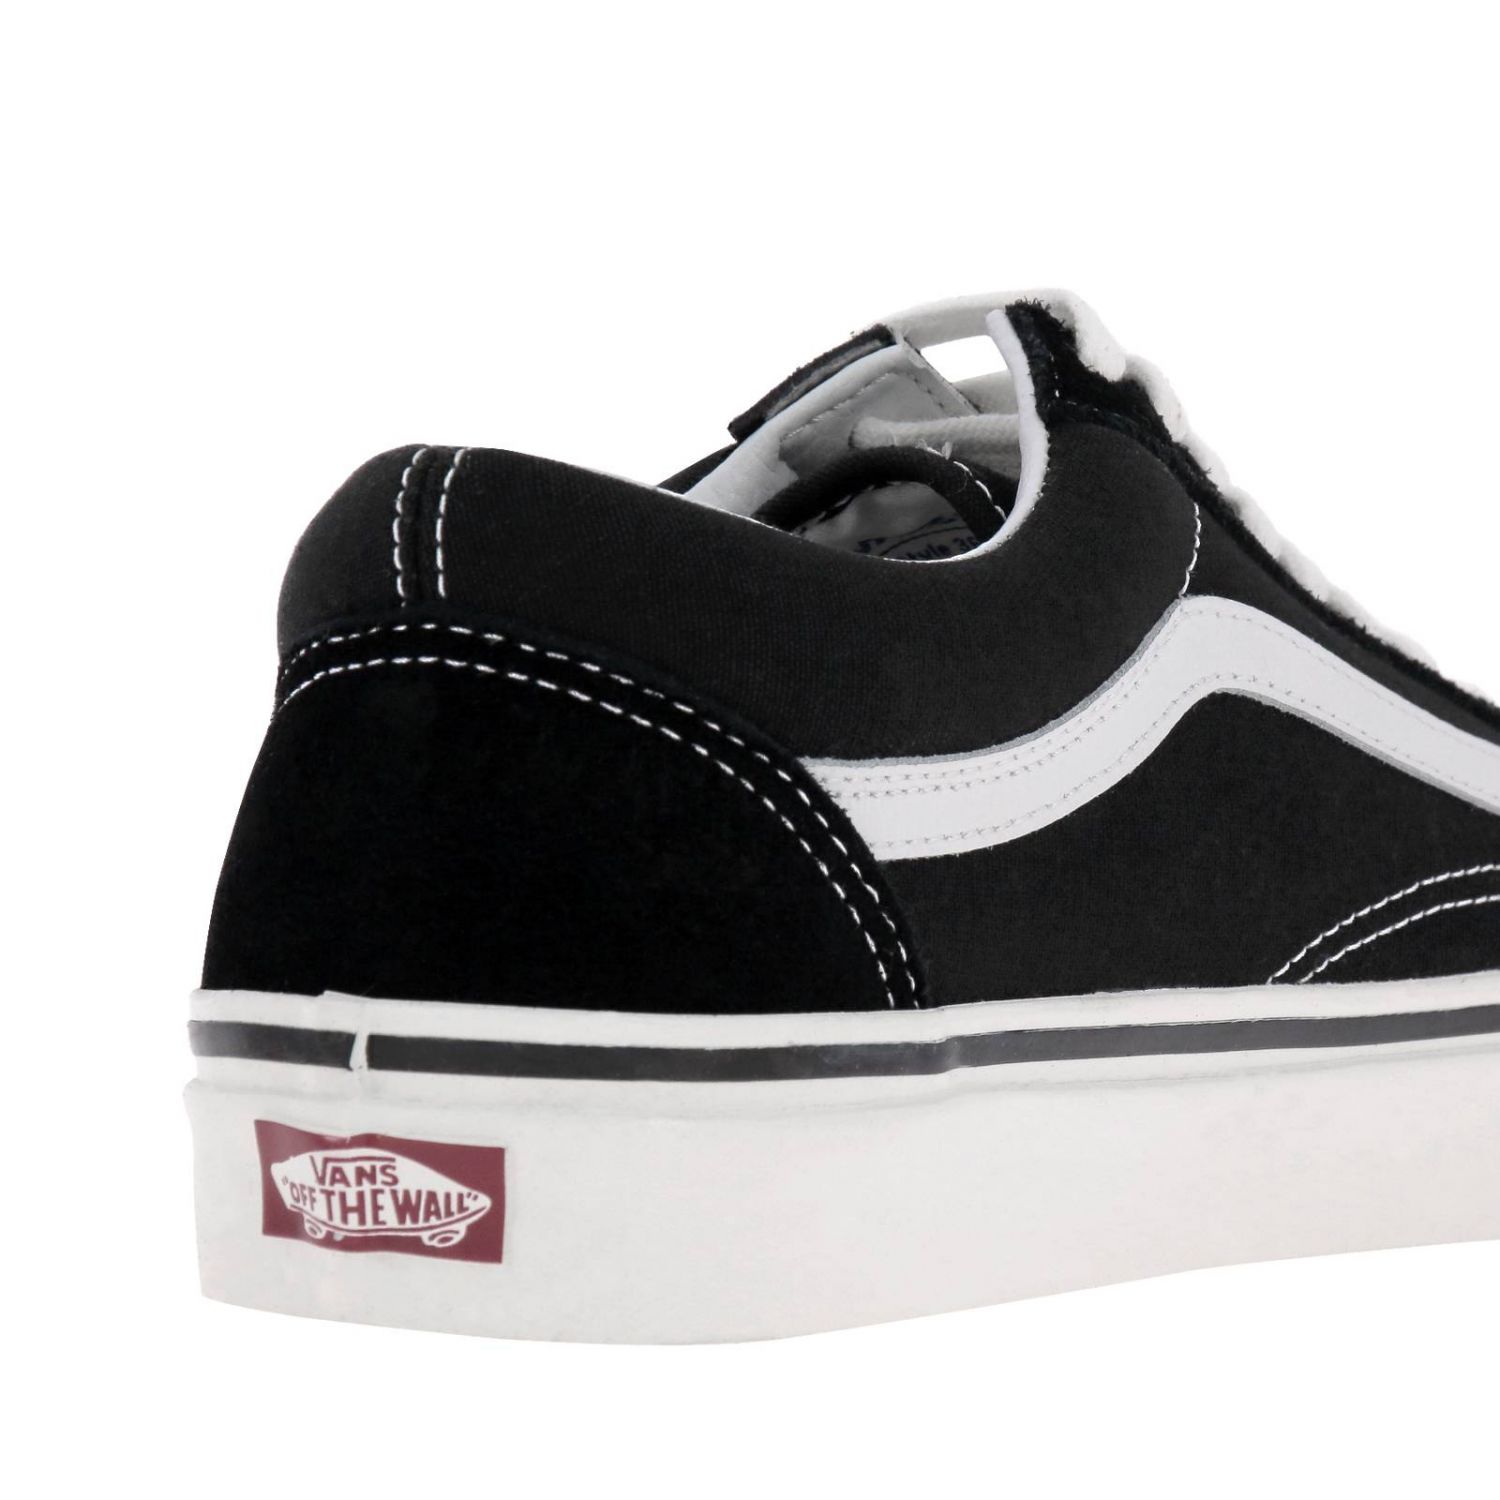 Sneakers Old skool anaheim factory in tela e camoscio | Sneakers Vans Uomo  Nero | Sneakers Vans VA38G2 Giglio IT